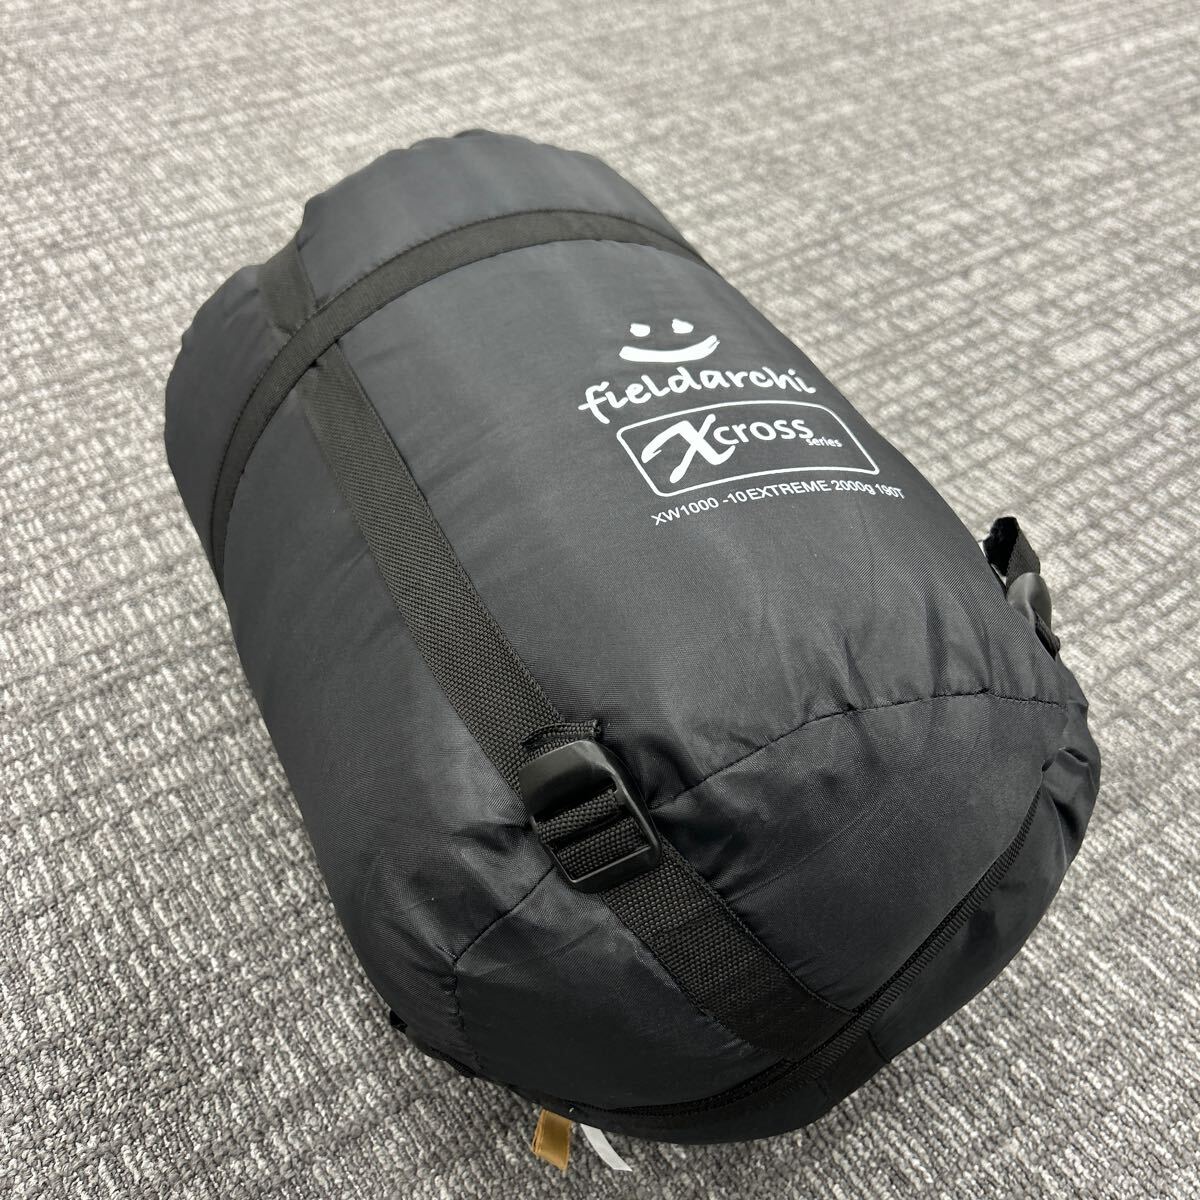  sleeping bag pillow attaching sleeping bag wide size limit use temperature -15*C envelope type winter sleeping area in the vehicle camp 23